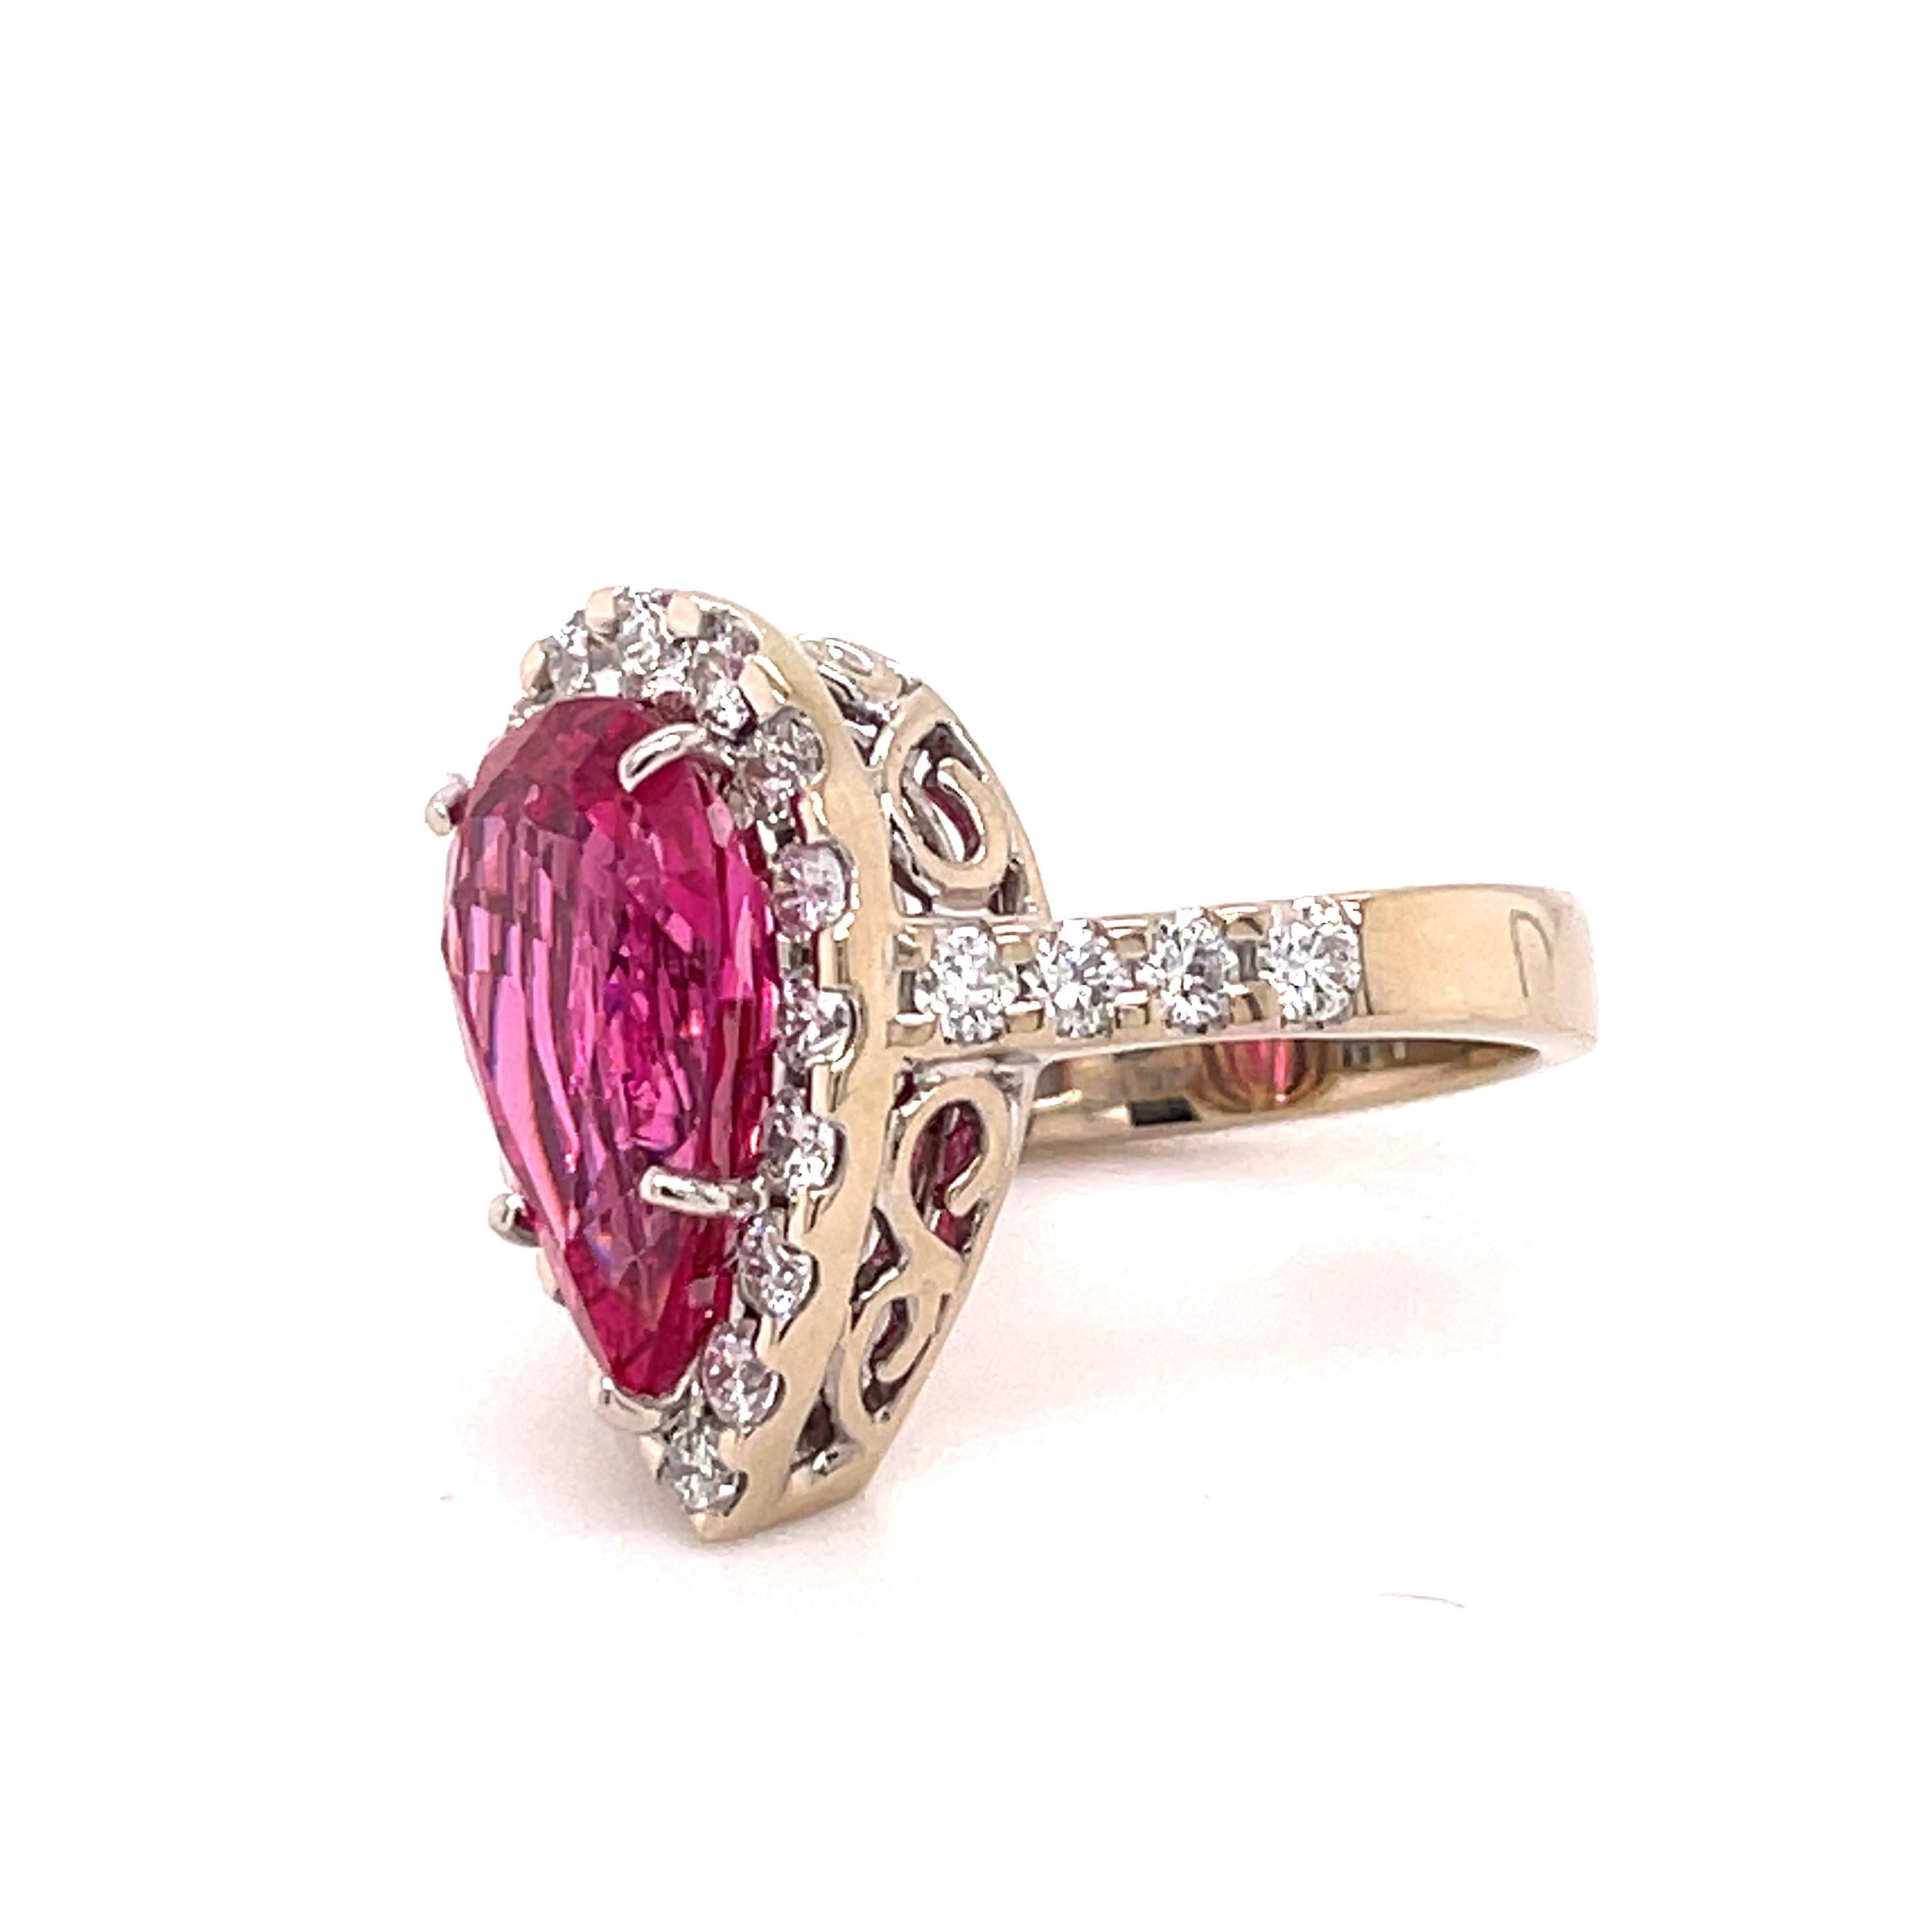 5.95 Carat Pink Spinel Diamond Gold Ring In New Condition For Sale In Tucson, AZ